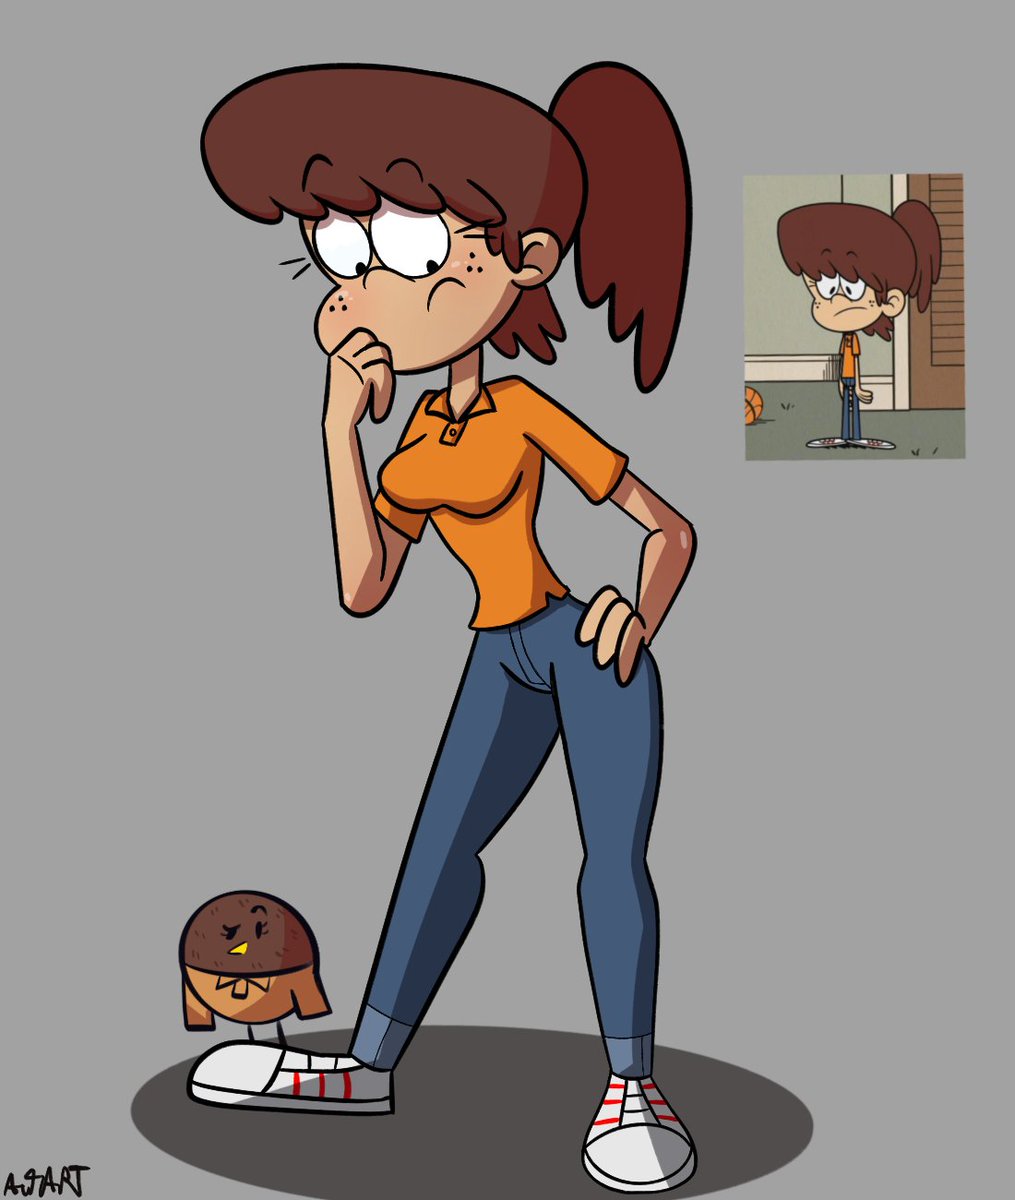 Lynn : I think this outfit is too tight. 🤔
#LynnLoud  #TLH #TheLoudHouse #Fanart #LoudHouse  #CartoonArt #TheLoudHousefanart